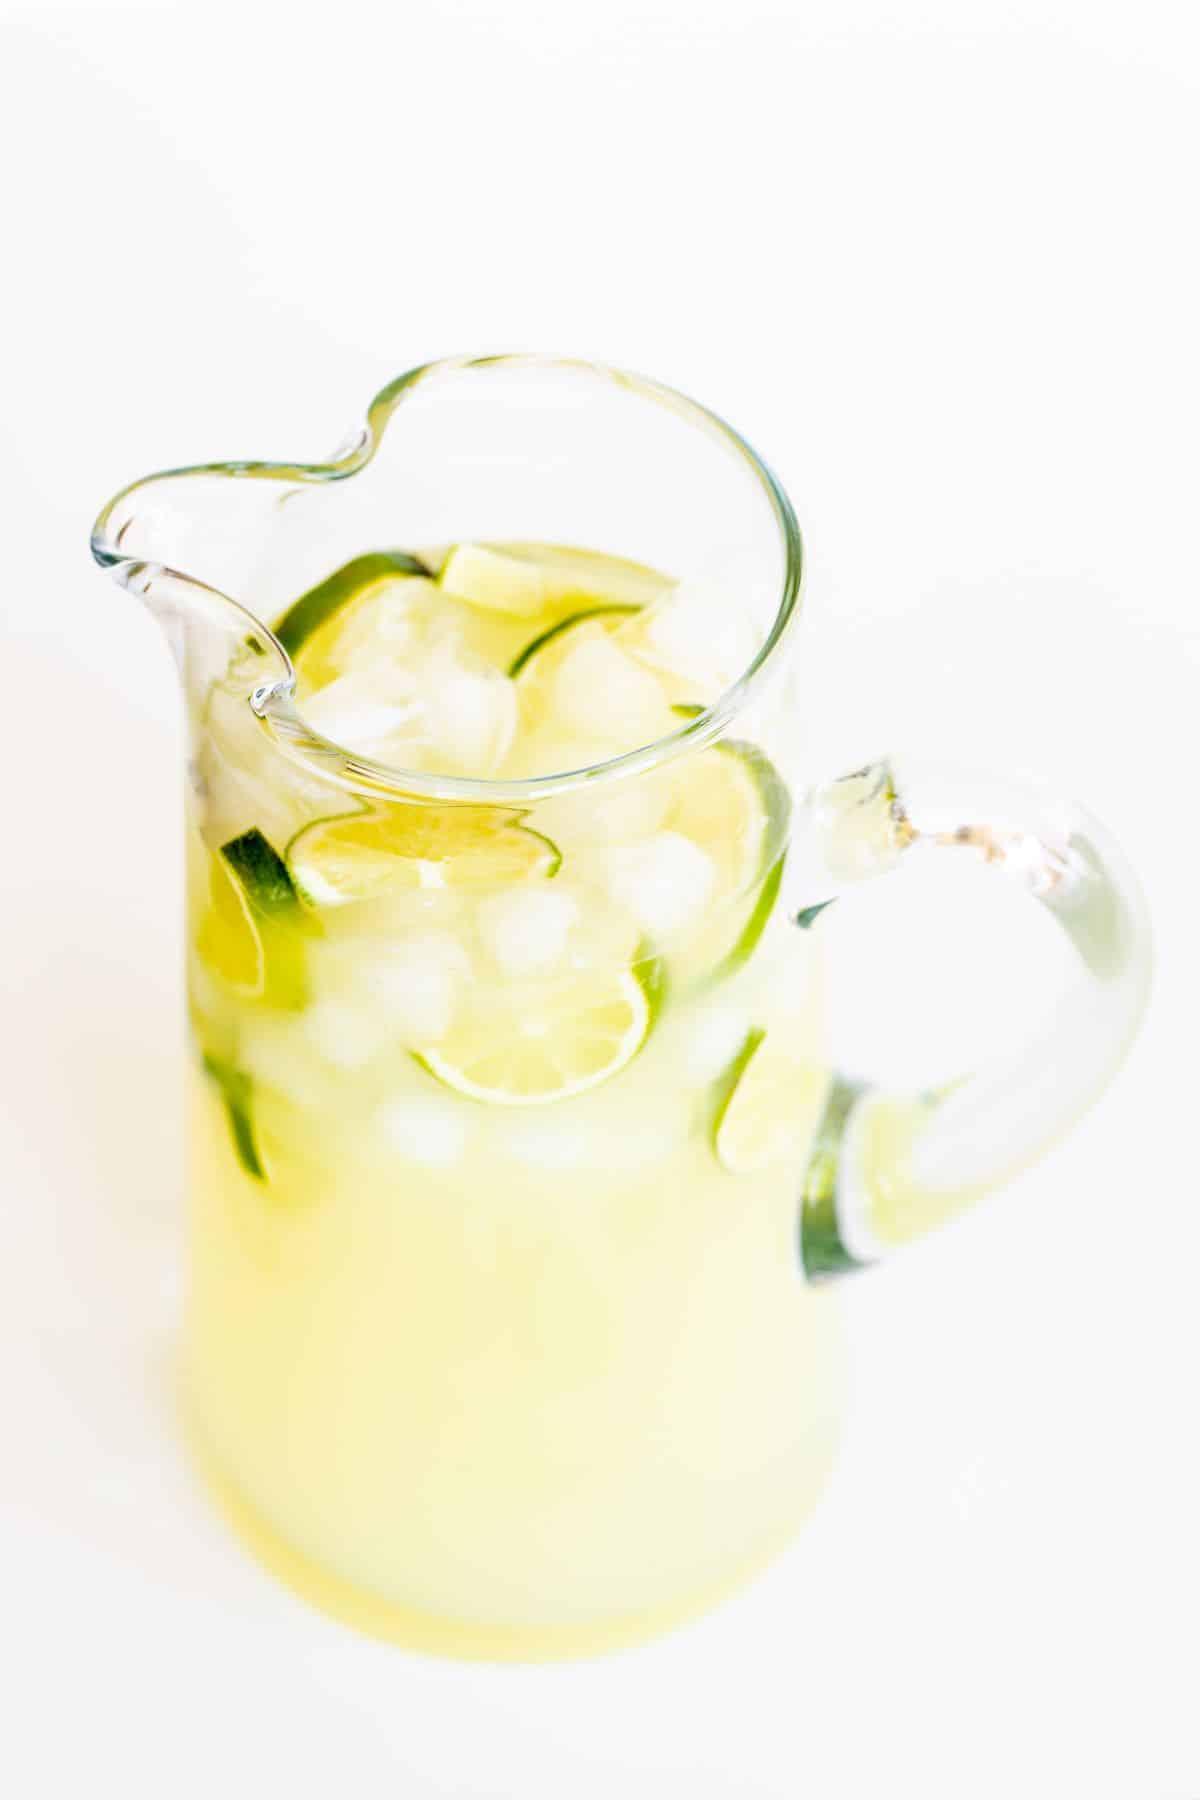 A clear glass pitcher full of homemade margaritas, sliced limes and ice.